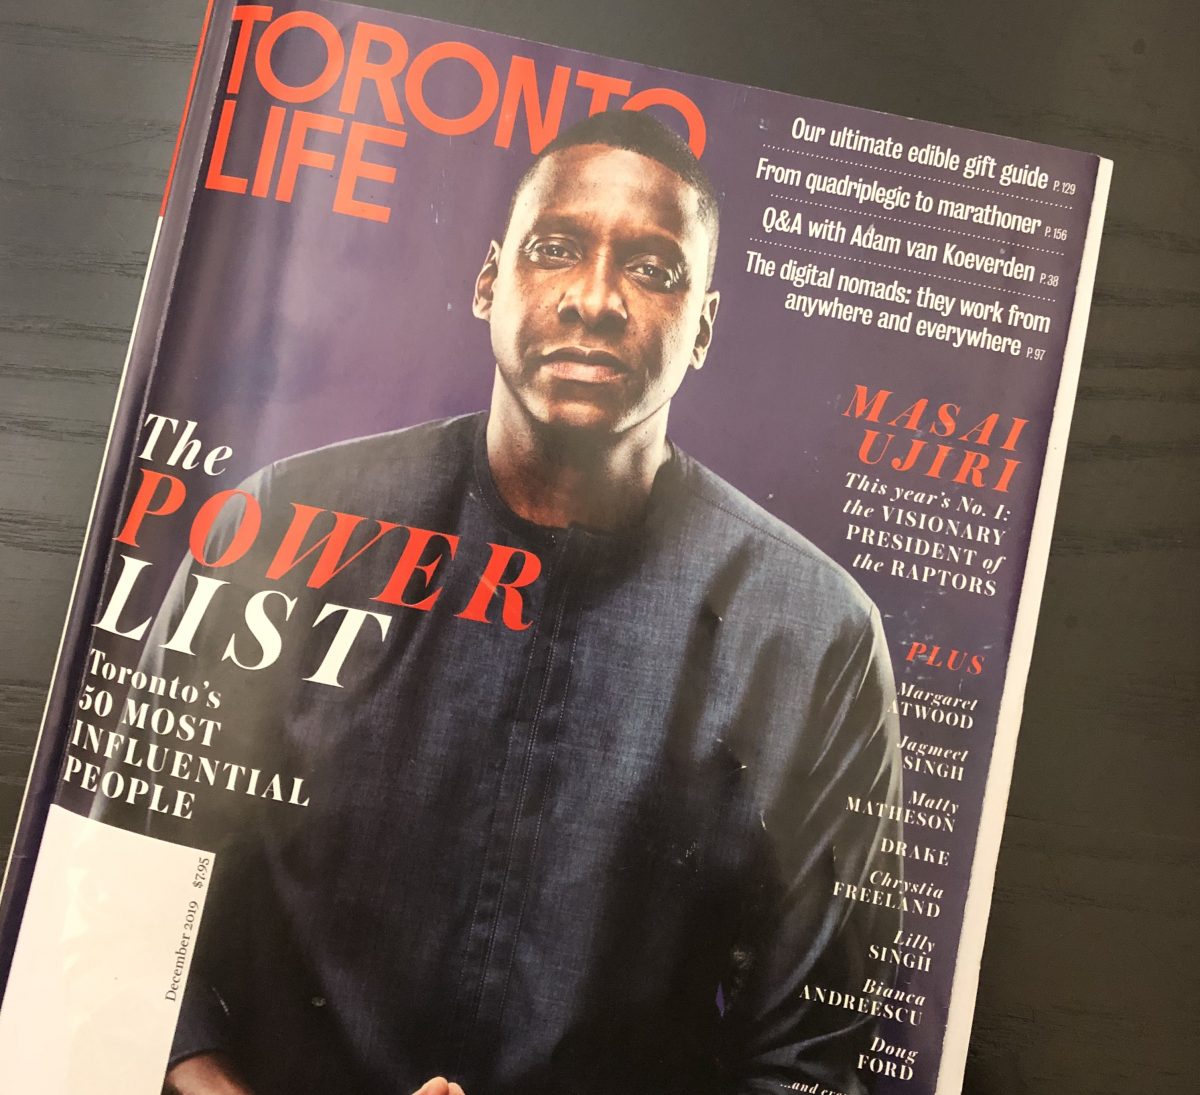 Cover of Toronto Life magazine with Masai Ujiri pictured. Large headline reads "The Power List"